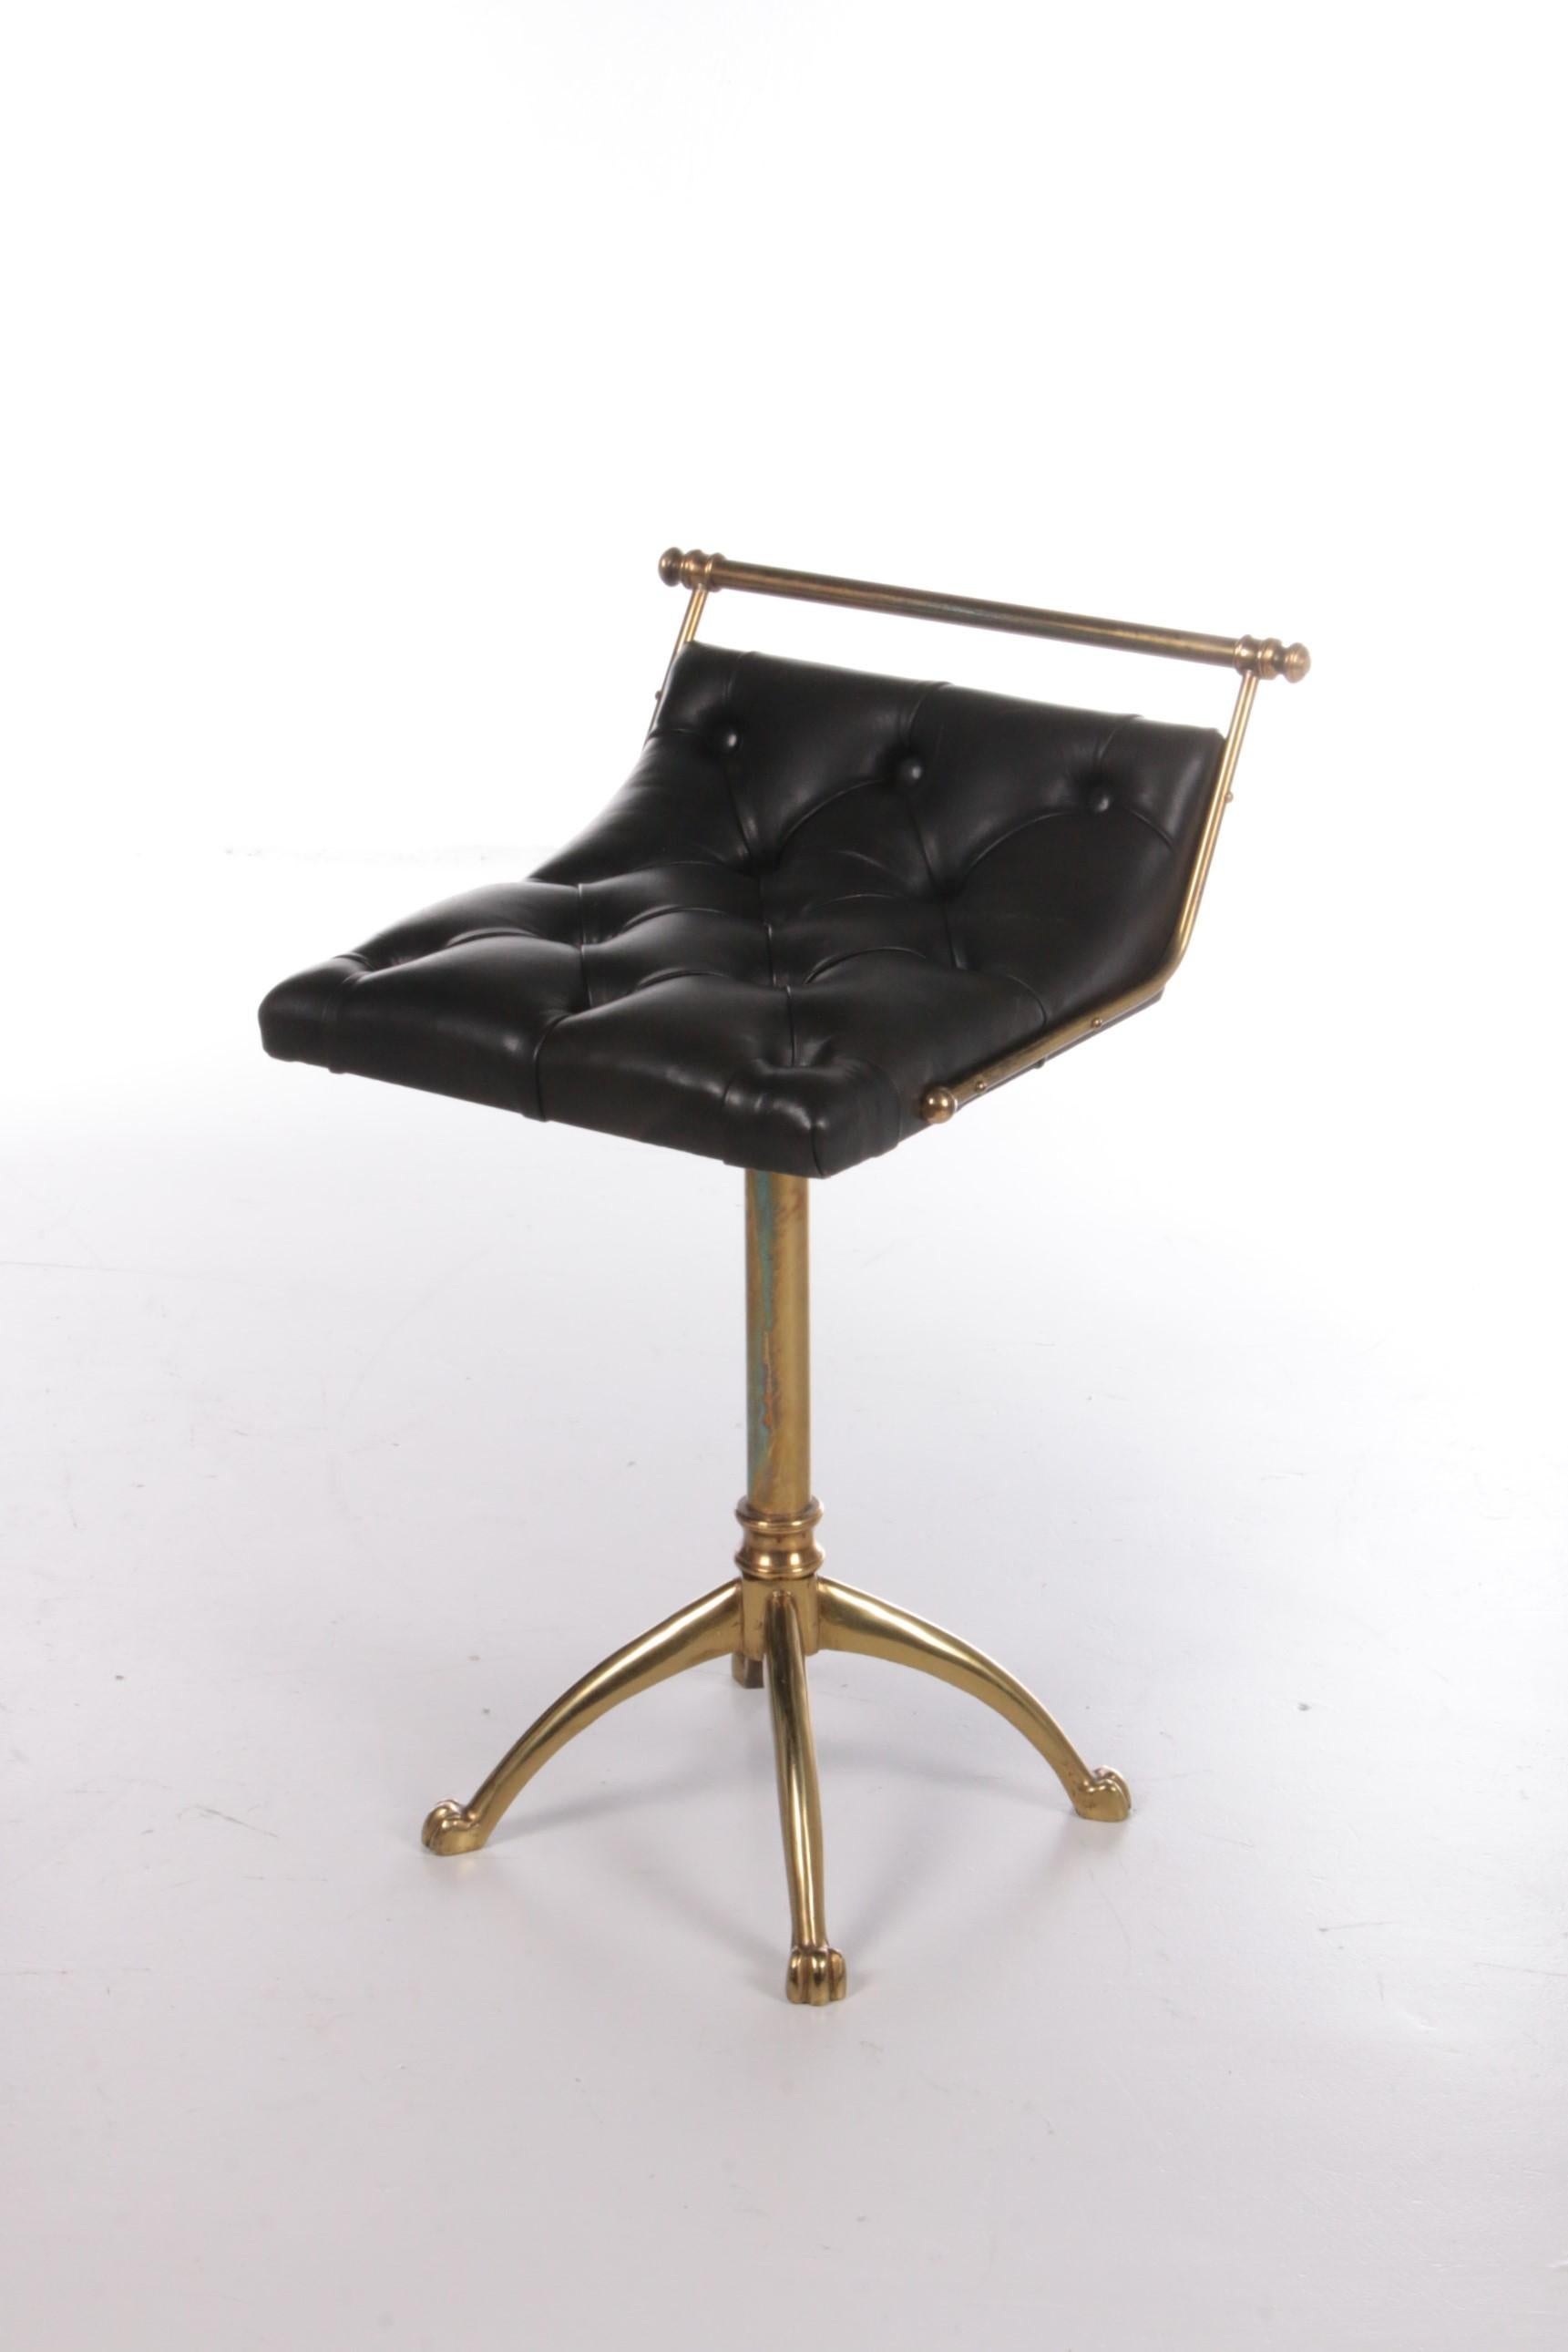 Vintage Leather & Gilt Brass Harper's Stool 1950s France.


Vintage leather and gilt brass harpist stool.

French vintage rotatable harpist's stool in gilt brass with tufted leather seat and claw feet.

A beautiful object even if you don't use it.